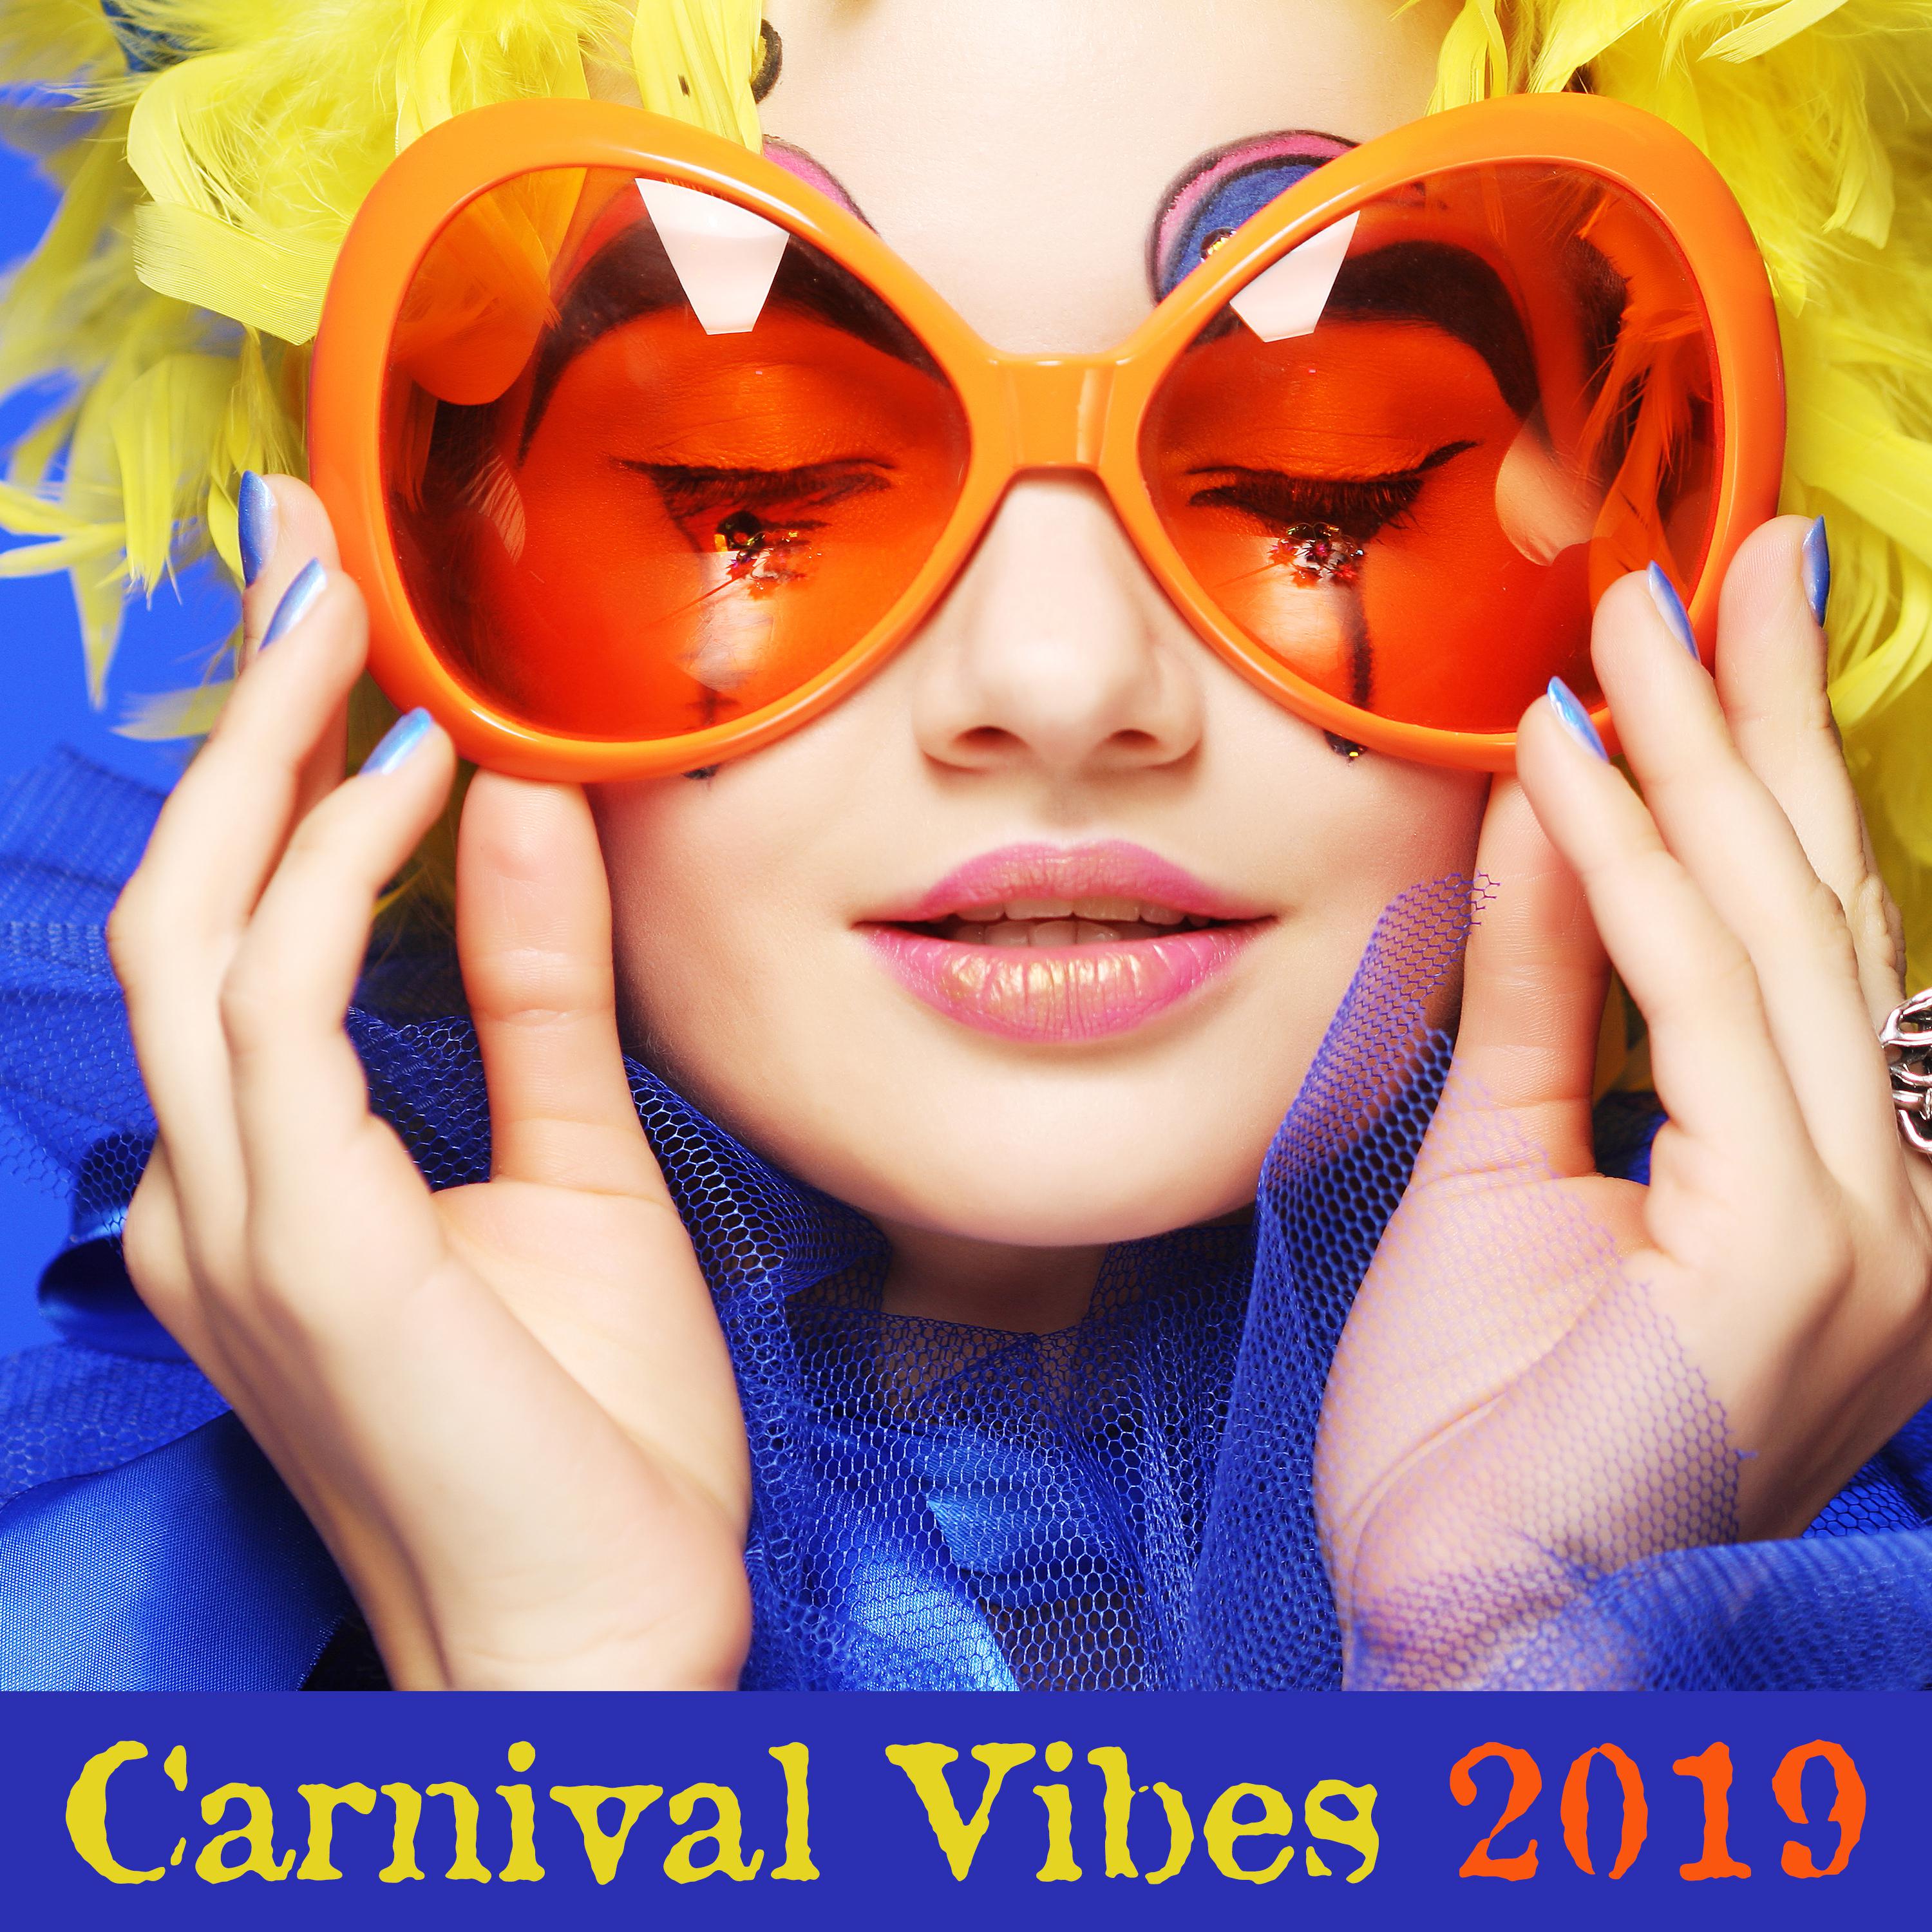 Carnival Vibes 2019 – Chillout Lounge, Carnival Chillout 2019, Dance Music, Deep Vibrations, Party Hits 2019